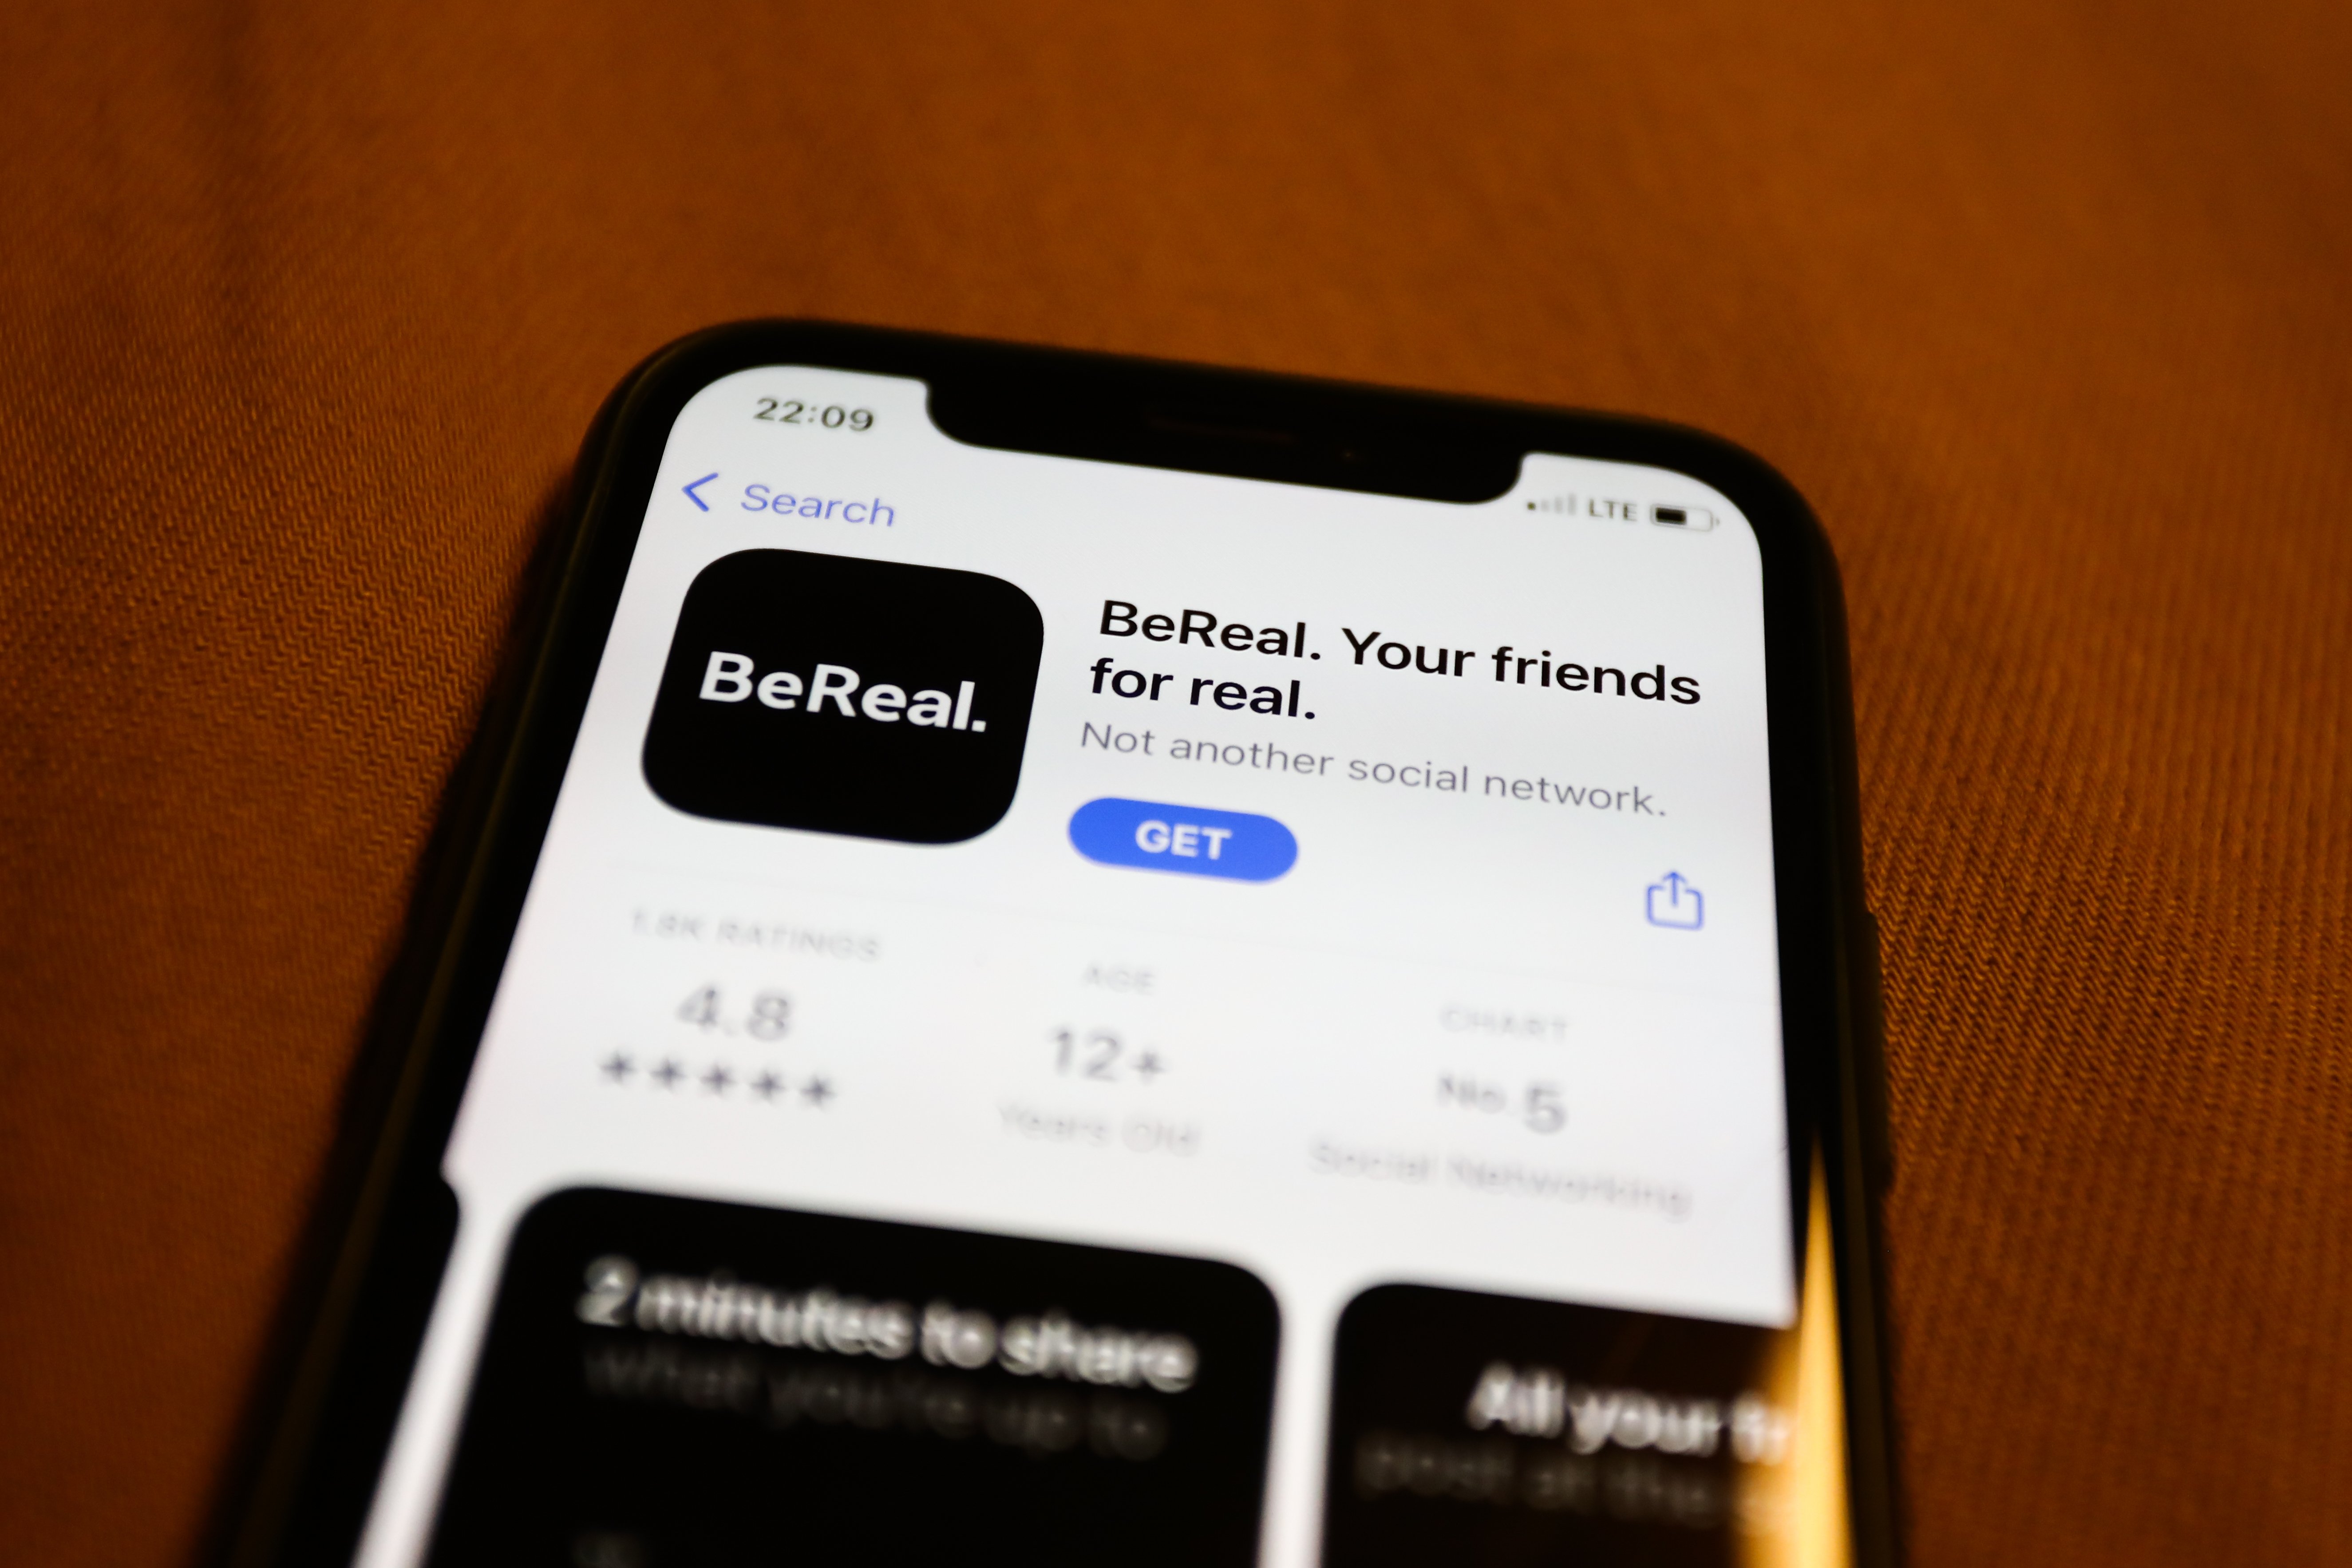 BeReal on the App Store displayed on a phone screen